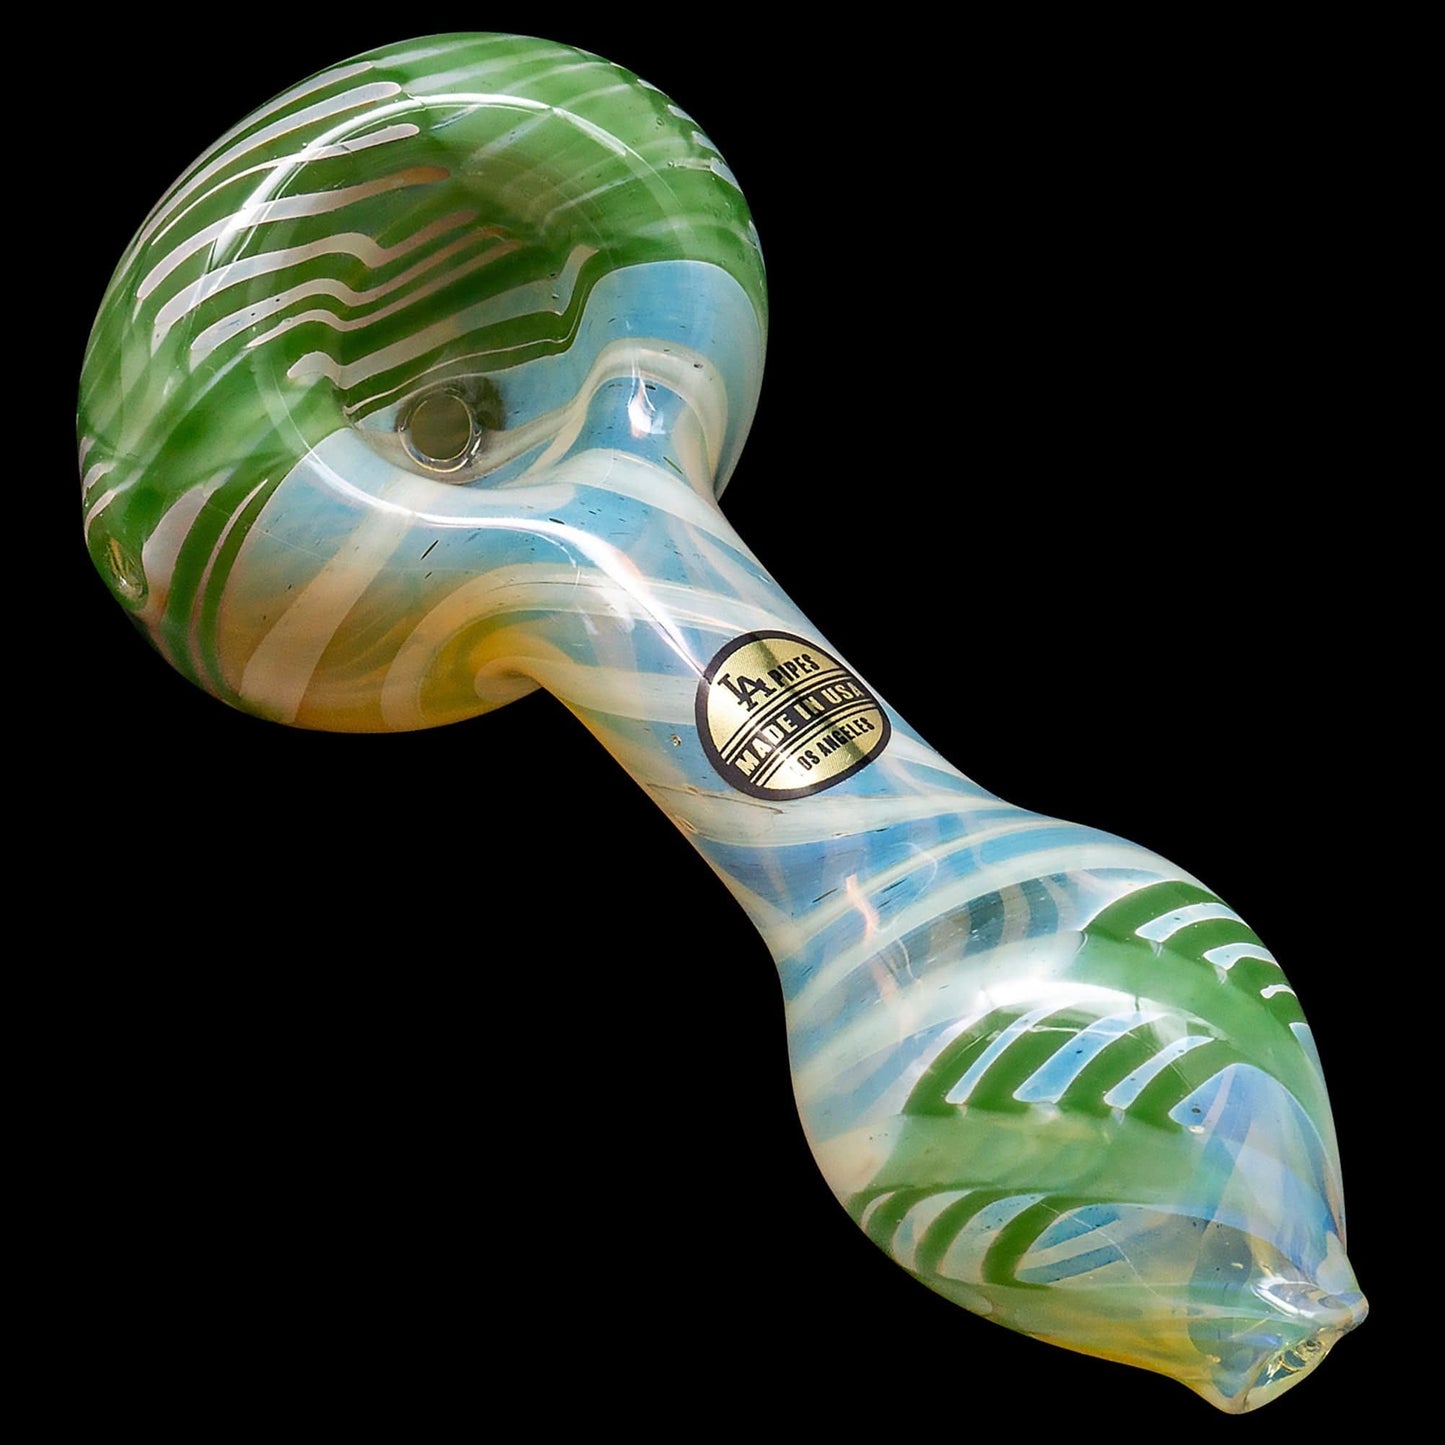 LA Pipes Hand Pipe Black / 4.5 Inch "Twisty Cane" Spoon Glass Pipe (Various Colors)